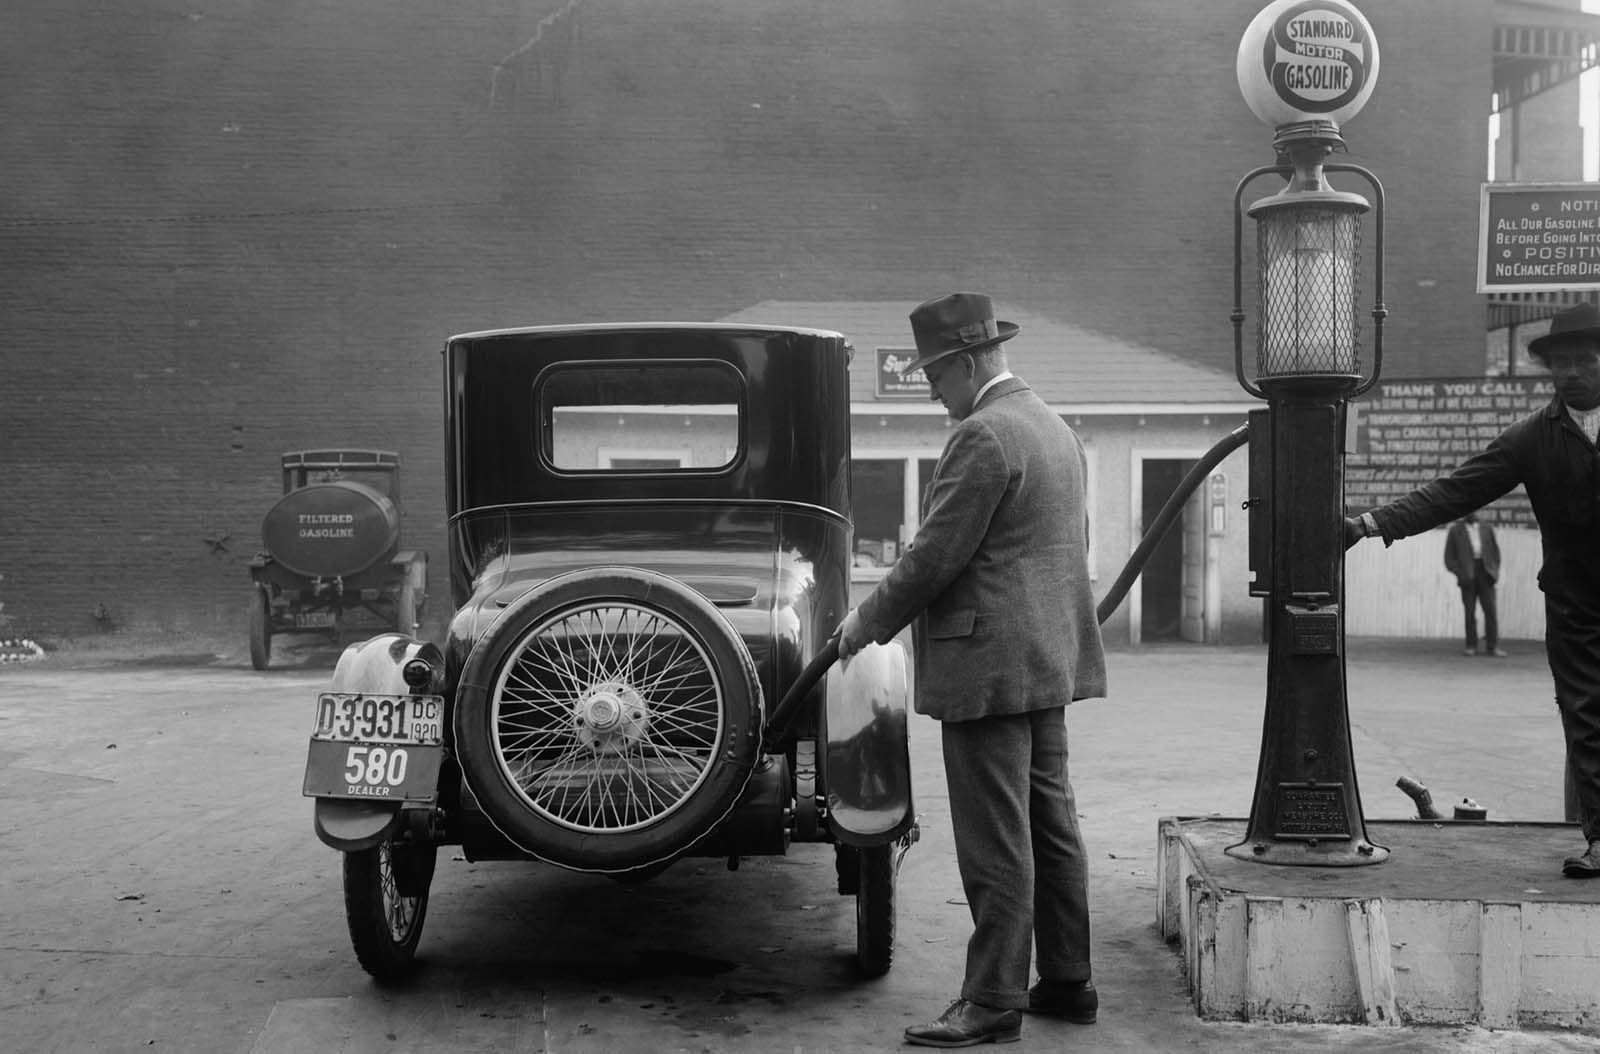 These Old Photos Show What Gas Stations Looked Like in the US From the 1920s and 1940s